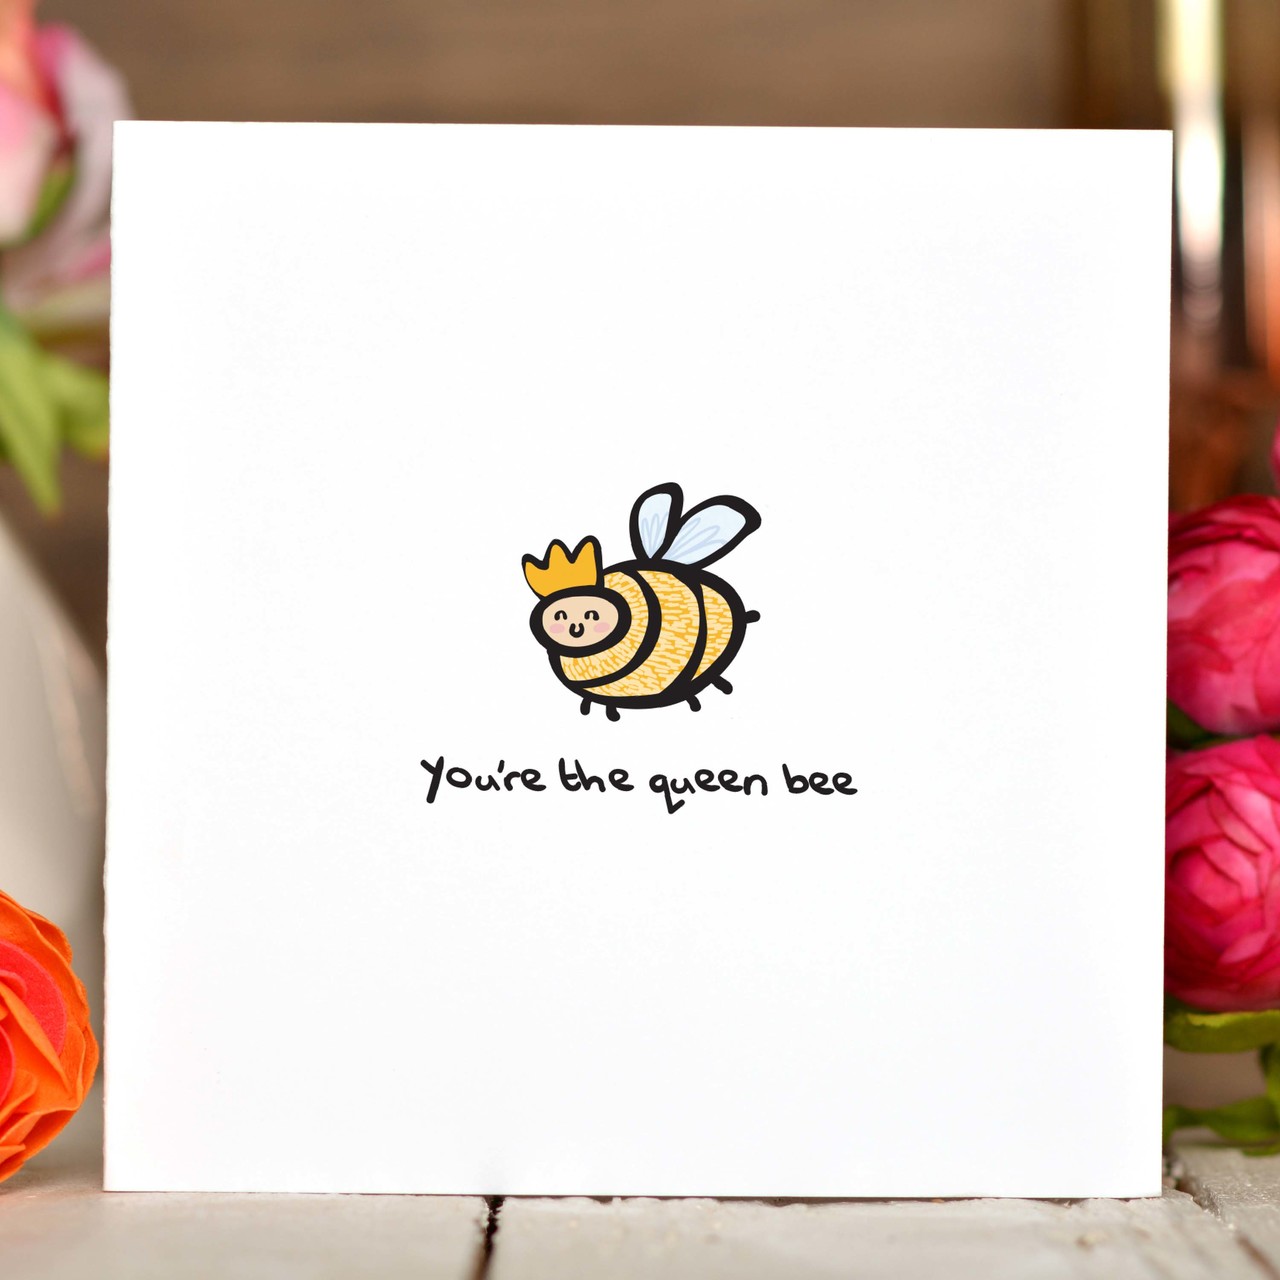 You’re the queen bee Card